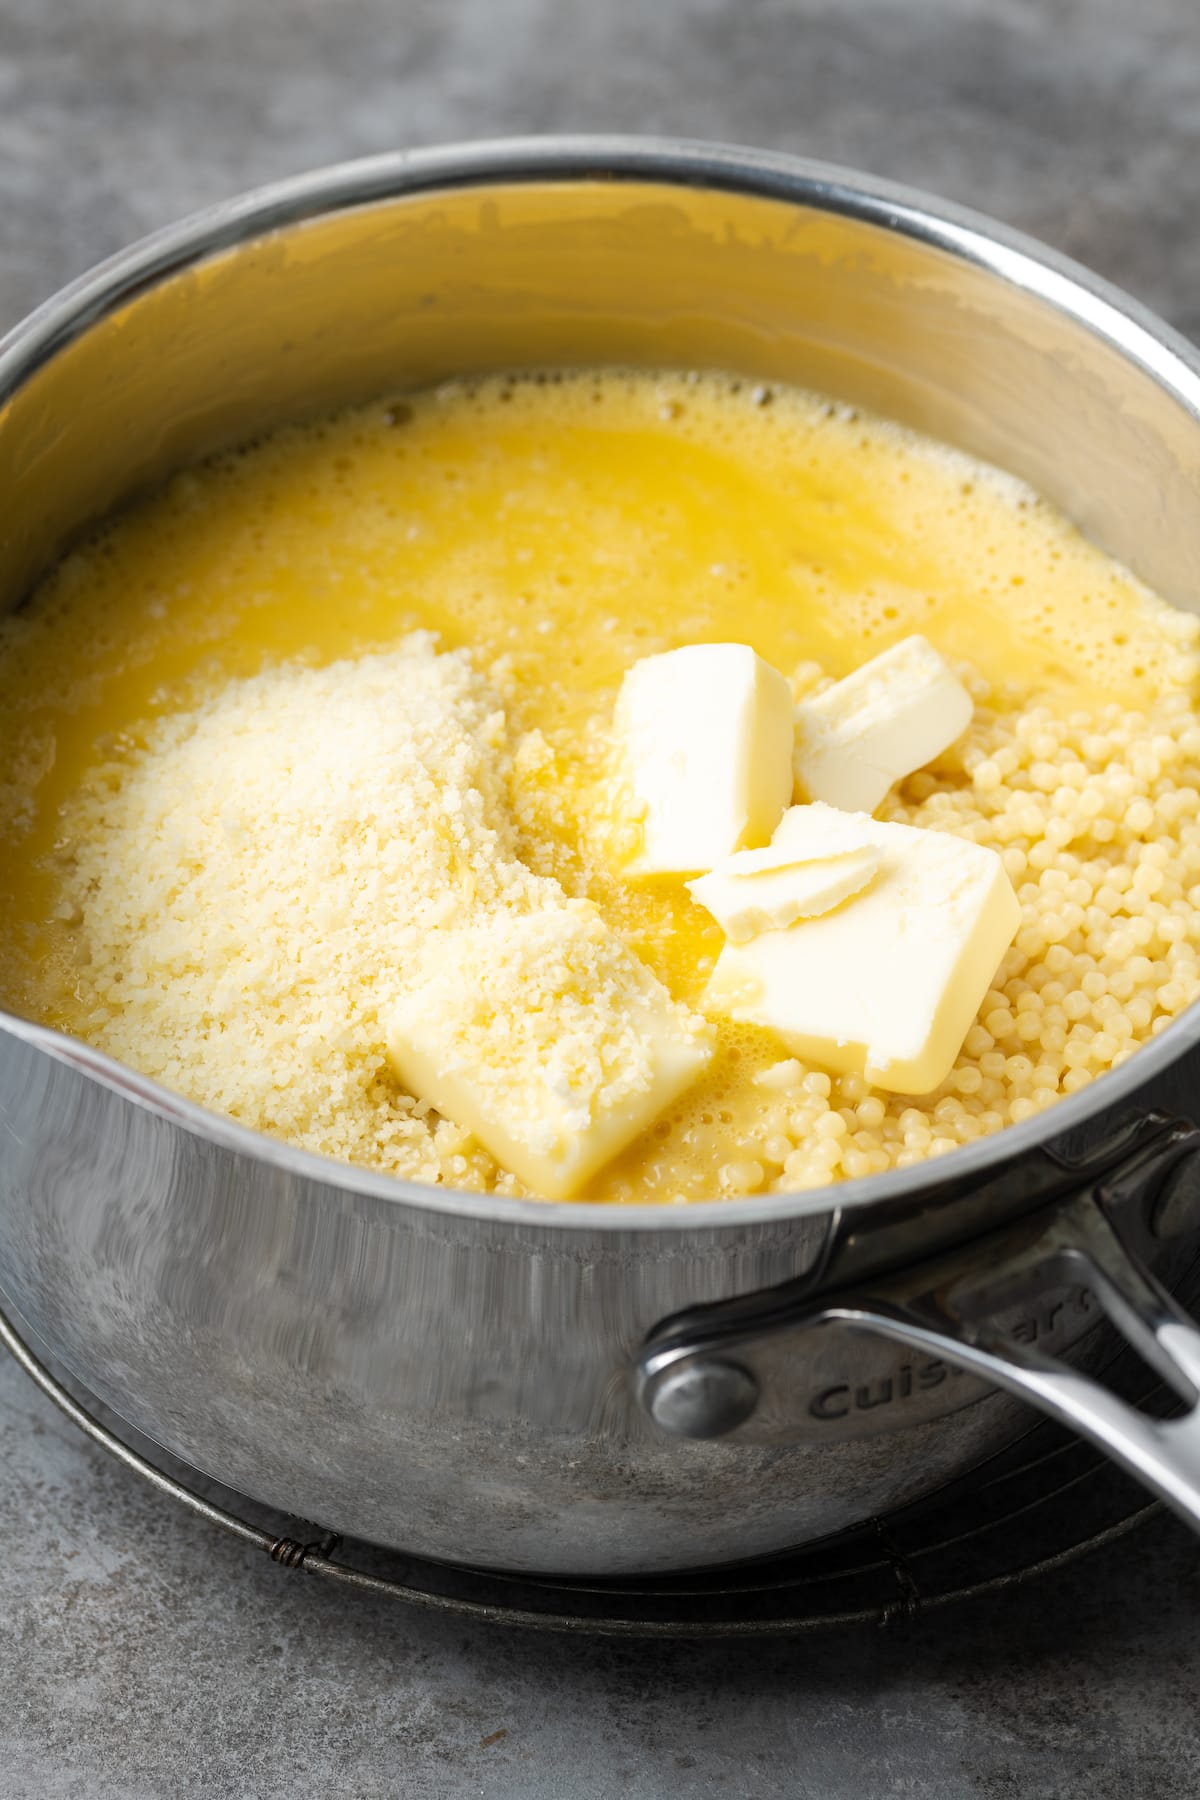 Butter, parmesan cheese, and egg added to a pot of pastina pasta.